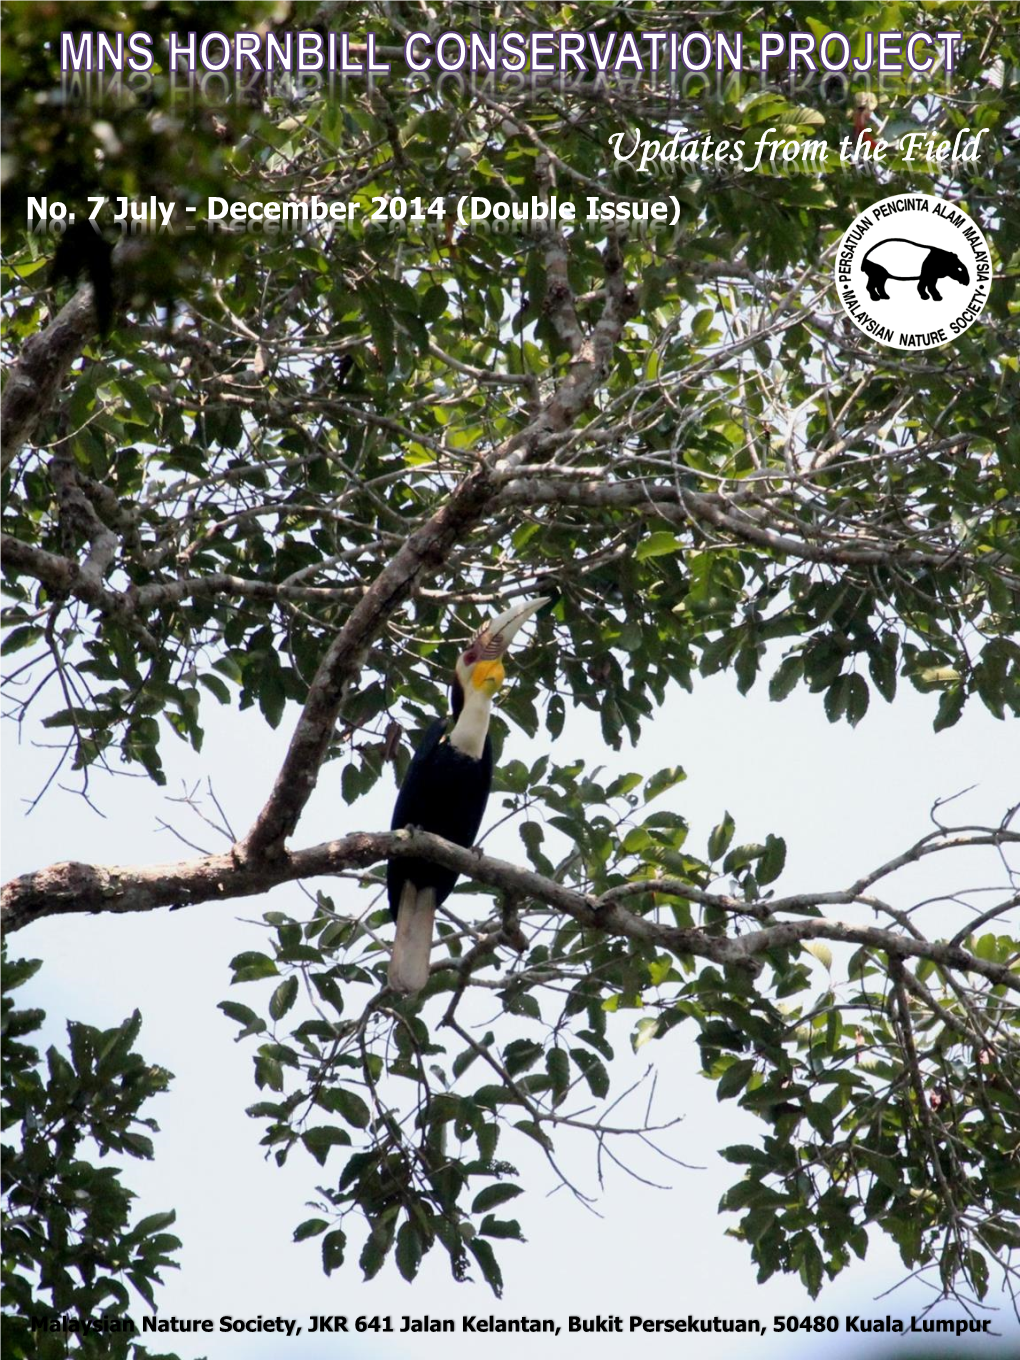 Hornbills and in Reaching out to Different Stakeholders from the Young to Policy/Decision-Makers to (Bird) Conservationist/Researchers Globally